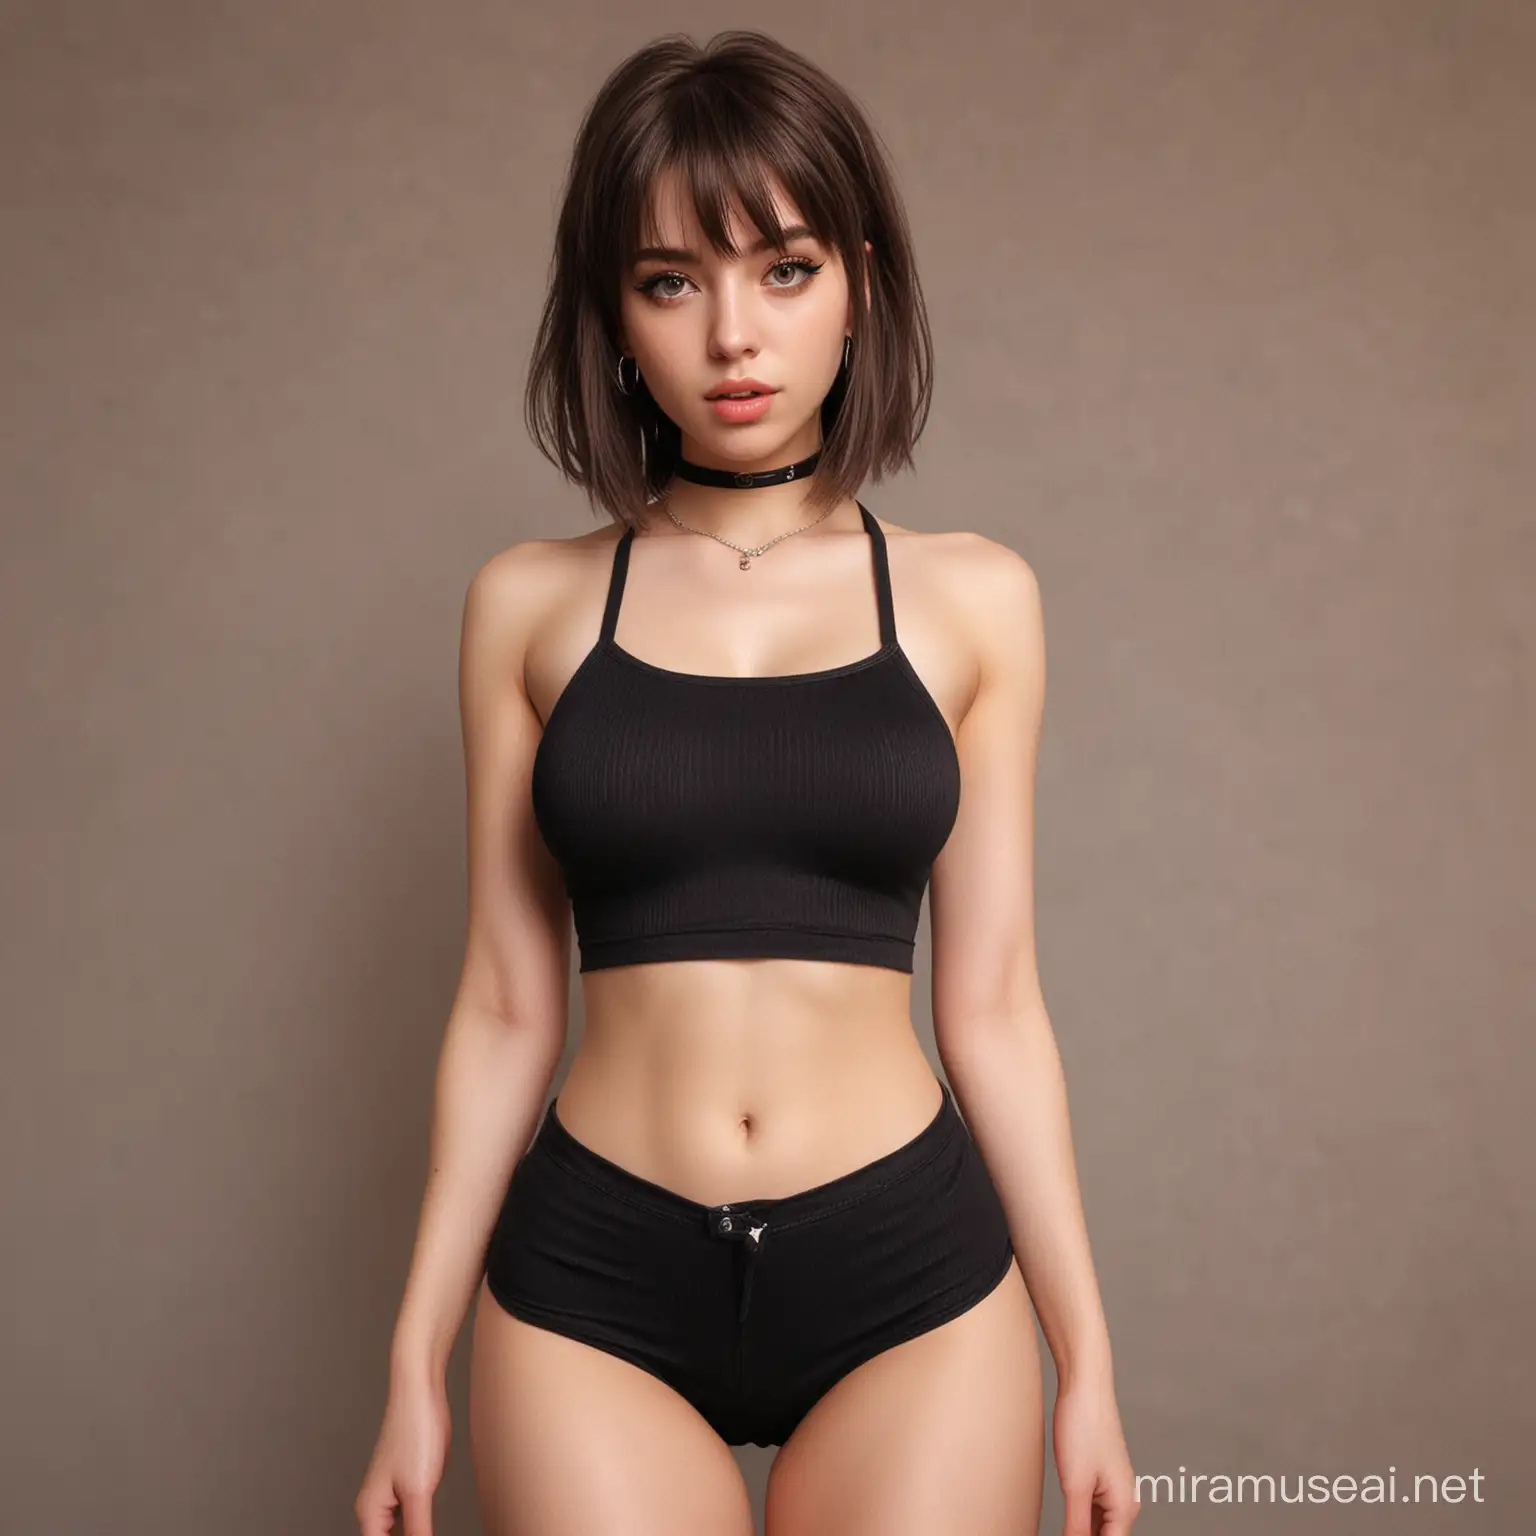 make a complete body pic, sexy and charming model, no erorrors, no duplicate. e-girl, style, ghotic thot oufit, thong, hot, stable, no blur. full body, hd, stablediffusion, high resolution, the girl has a face whit a bangs hair cut, no deformations, 8k, gorgeous outfit, definited face, proportions, charming vibes, real hair, no low definition, no imperfections, realistic body and face, piercing, sultry, tart, lass, real skin texture, full body, gorgeous dettails, cute crop top, proportions, aesthetic outfit, e-girl style makup, definted acessory, no deformations, realistic proportions, no deformed acessory, no low quality acessory, realistic hair, full body, beautyful, realistic locations background, realistic girl, realistic fabric, 